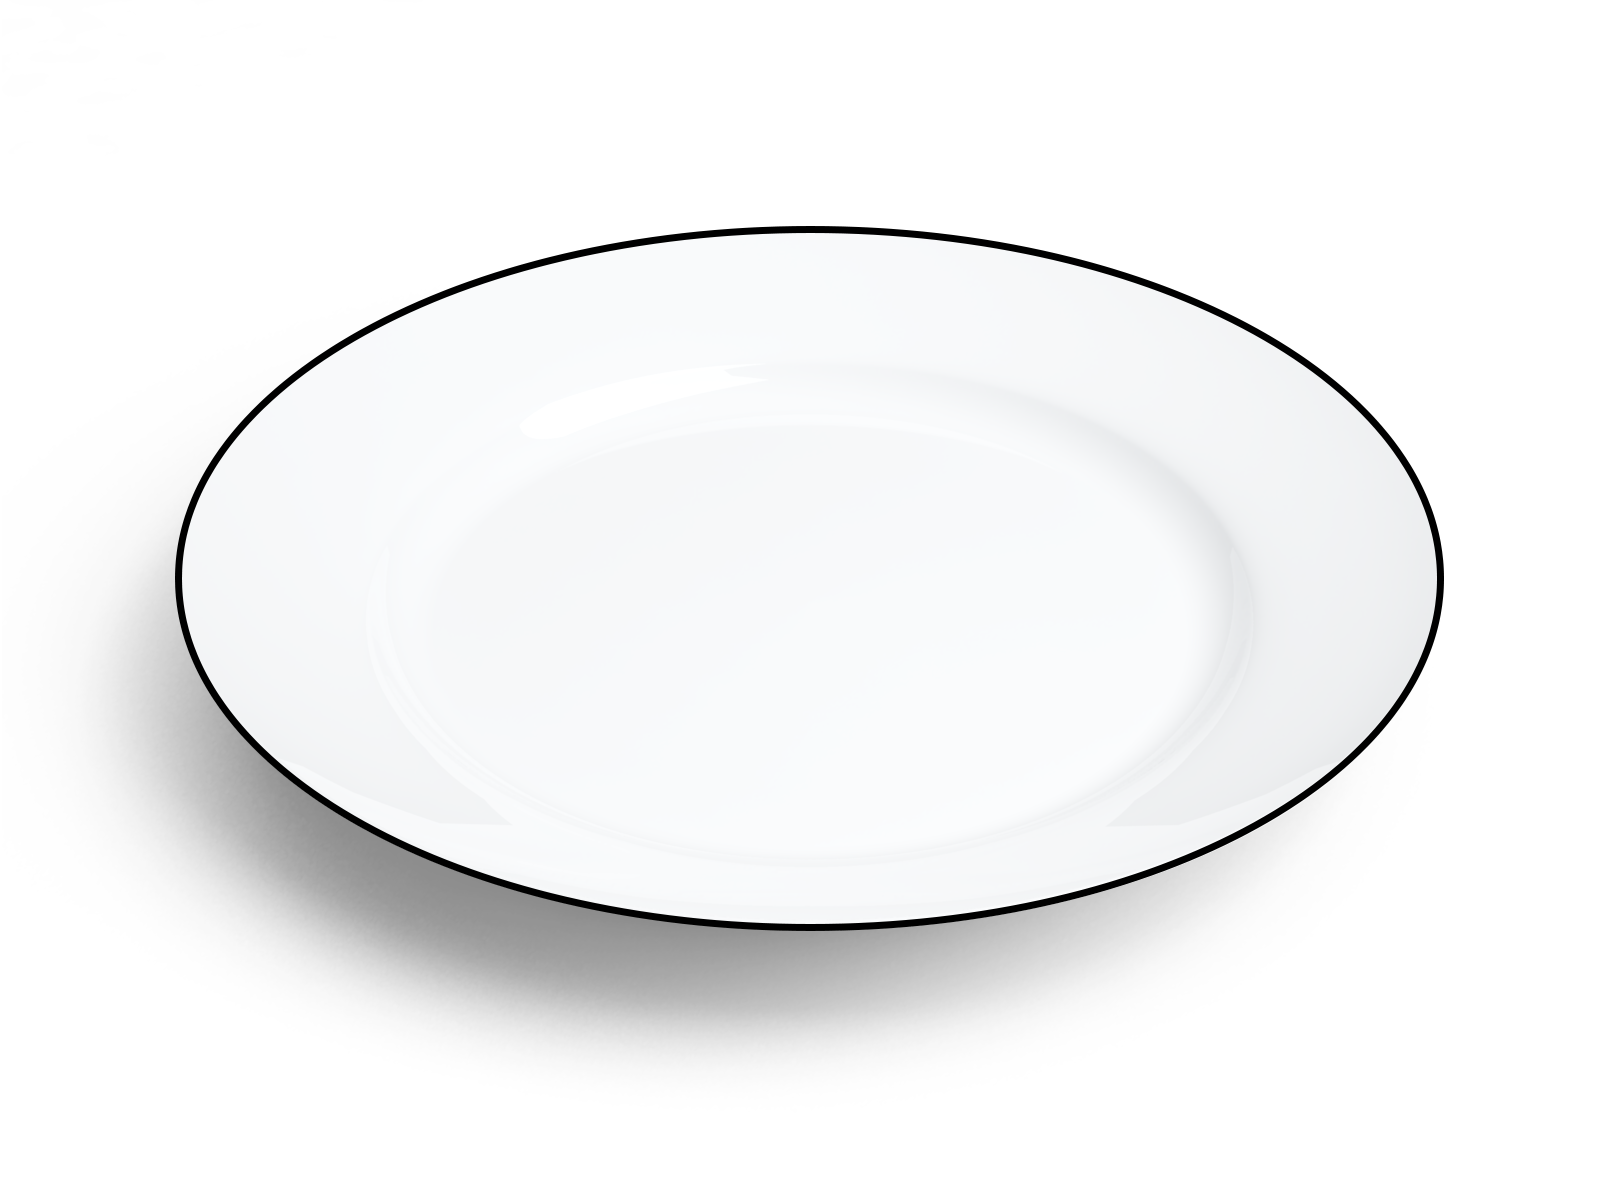 Plat rond or